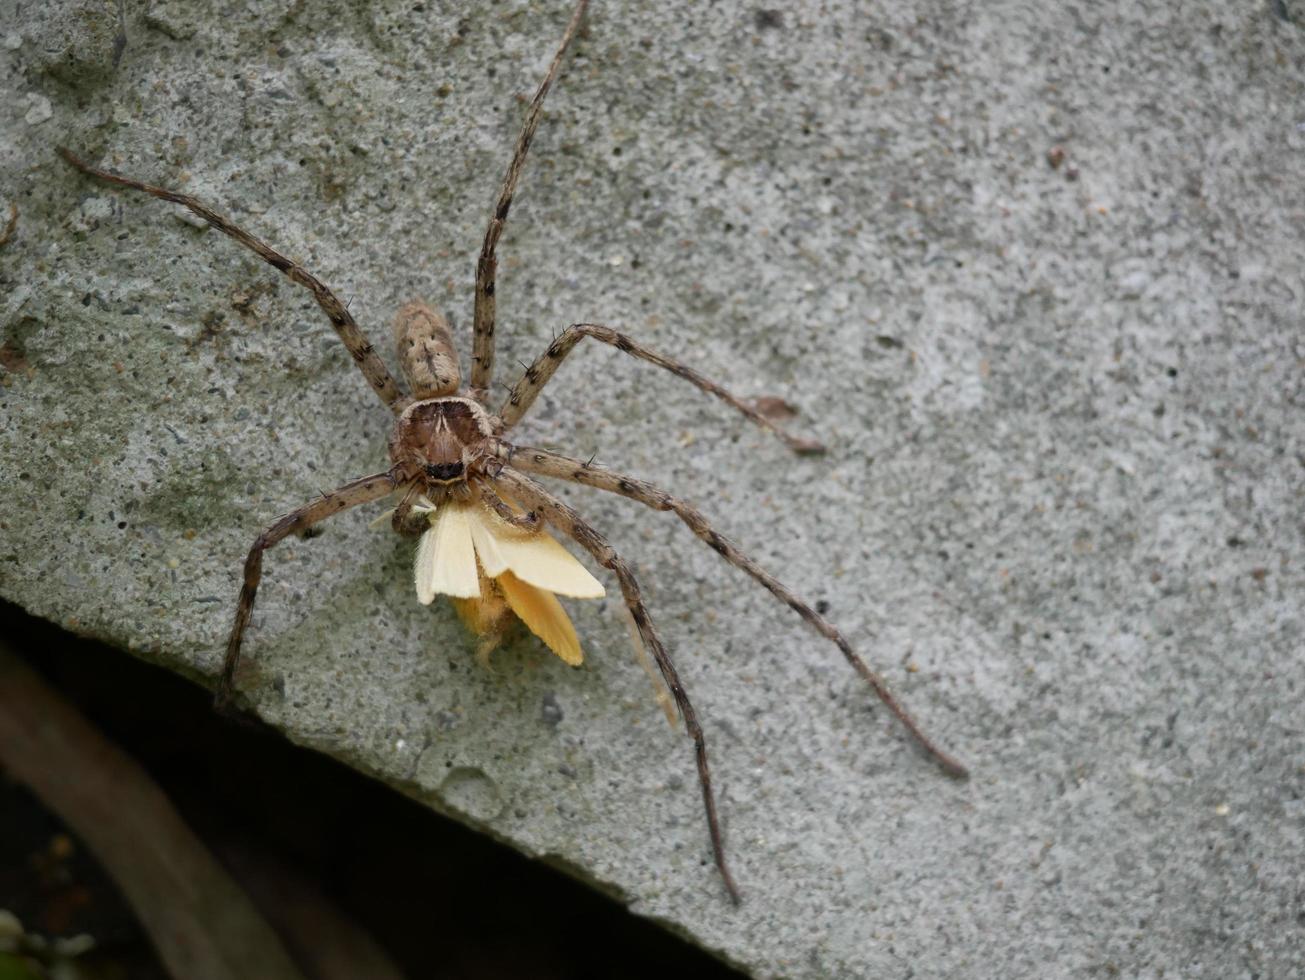 The brown spider grabs its prey for food. photo